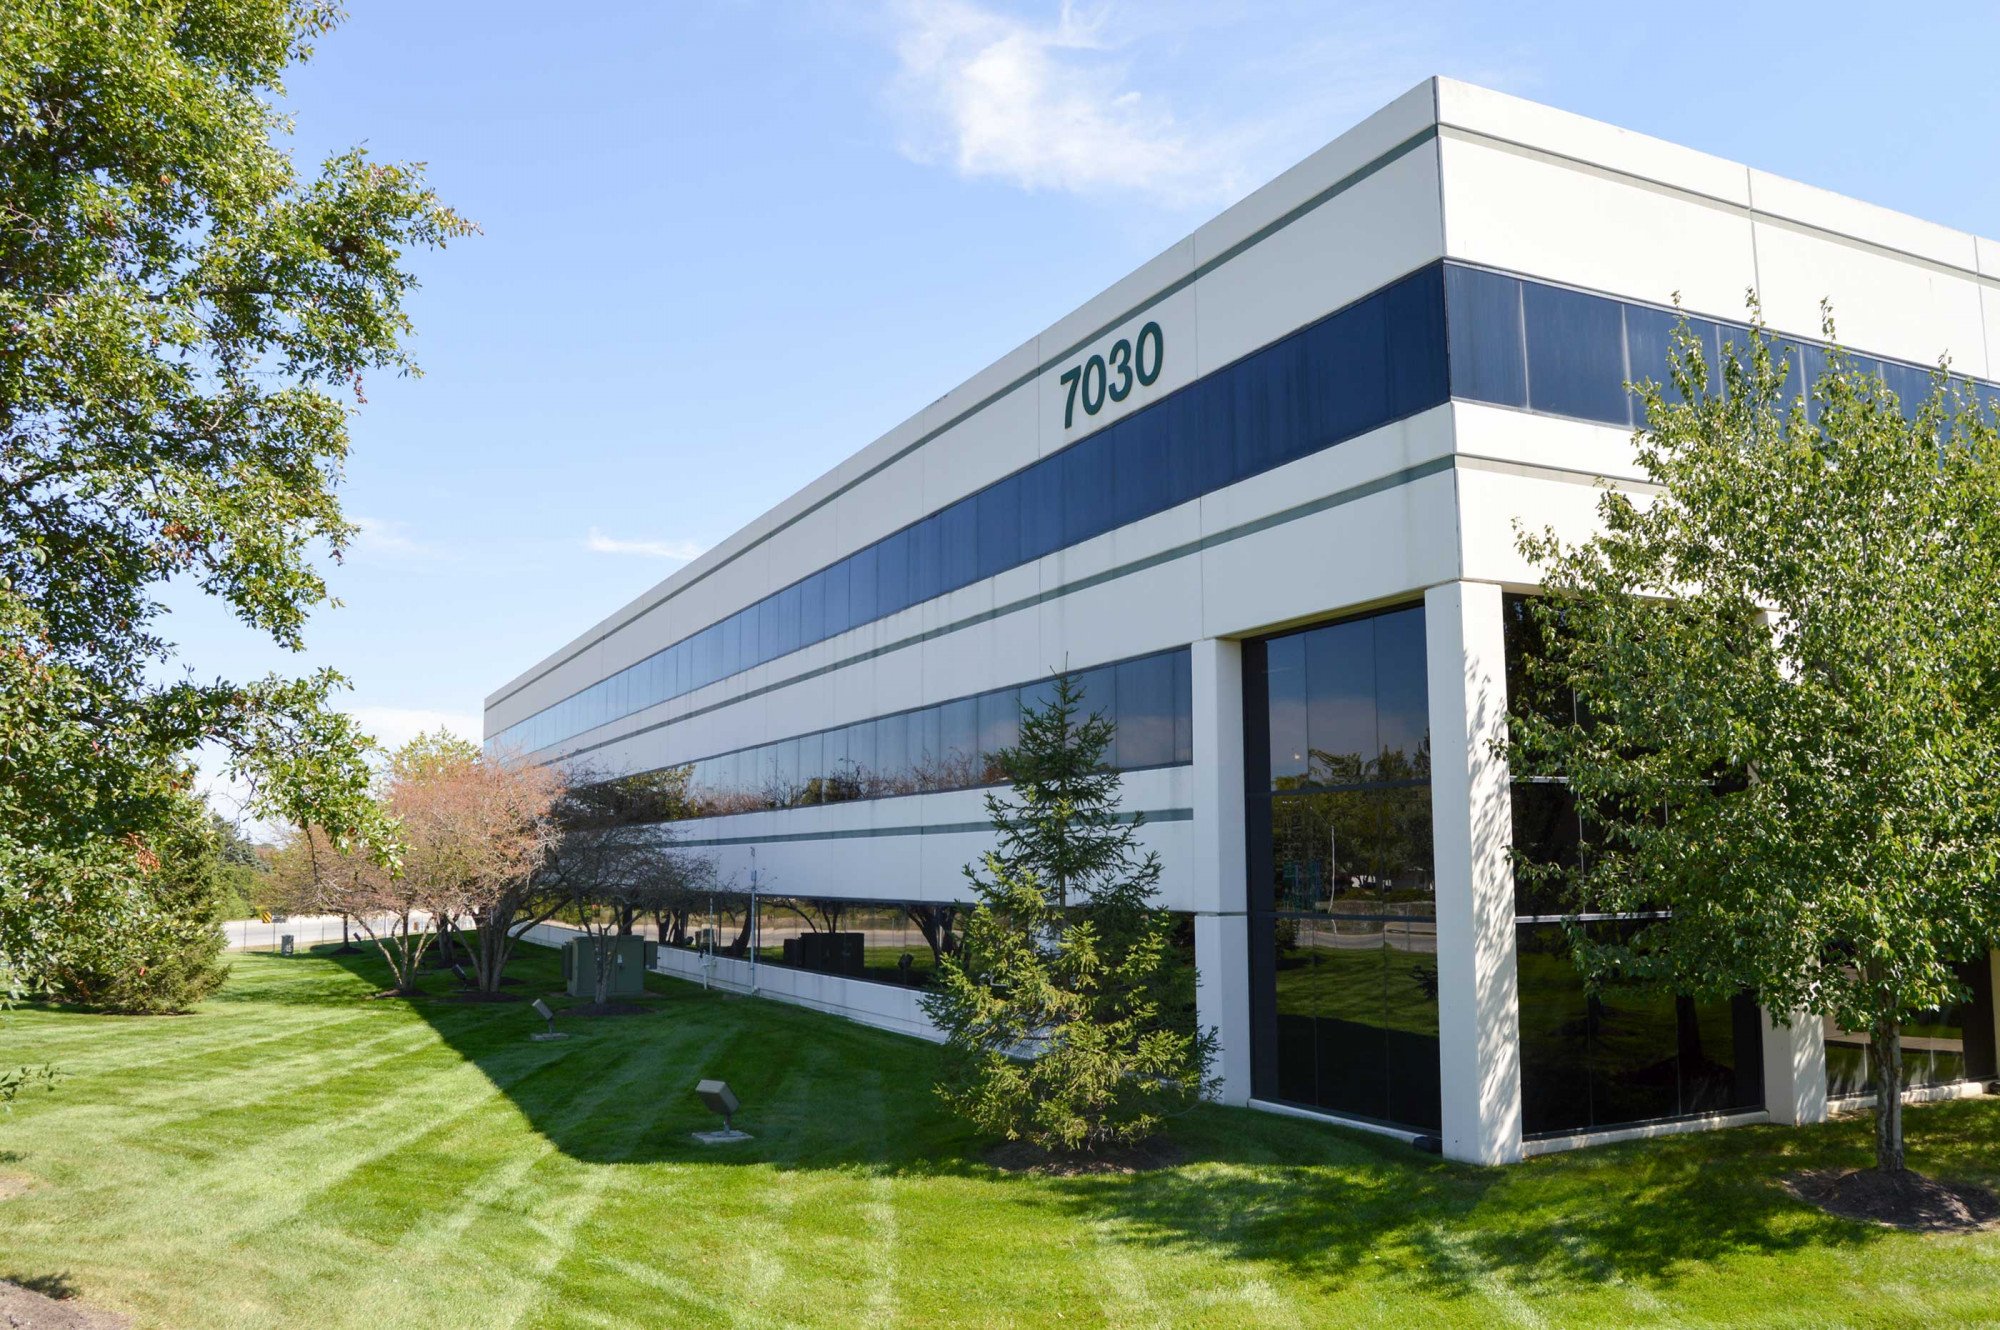 Sturges Property Group 7030 Pointe Inverness Way Office Building Business Park Fort Wayne